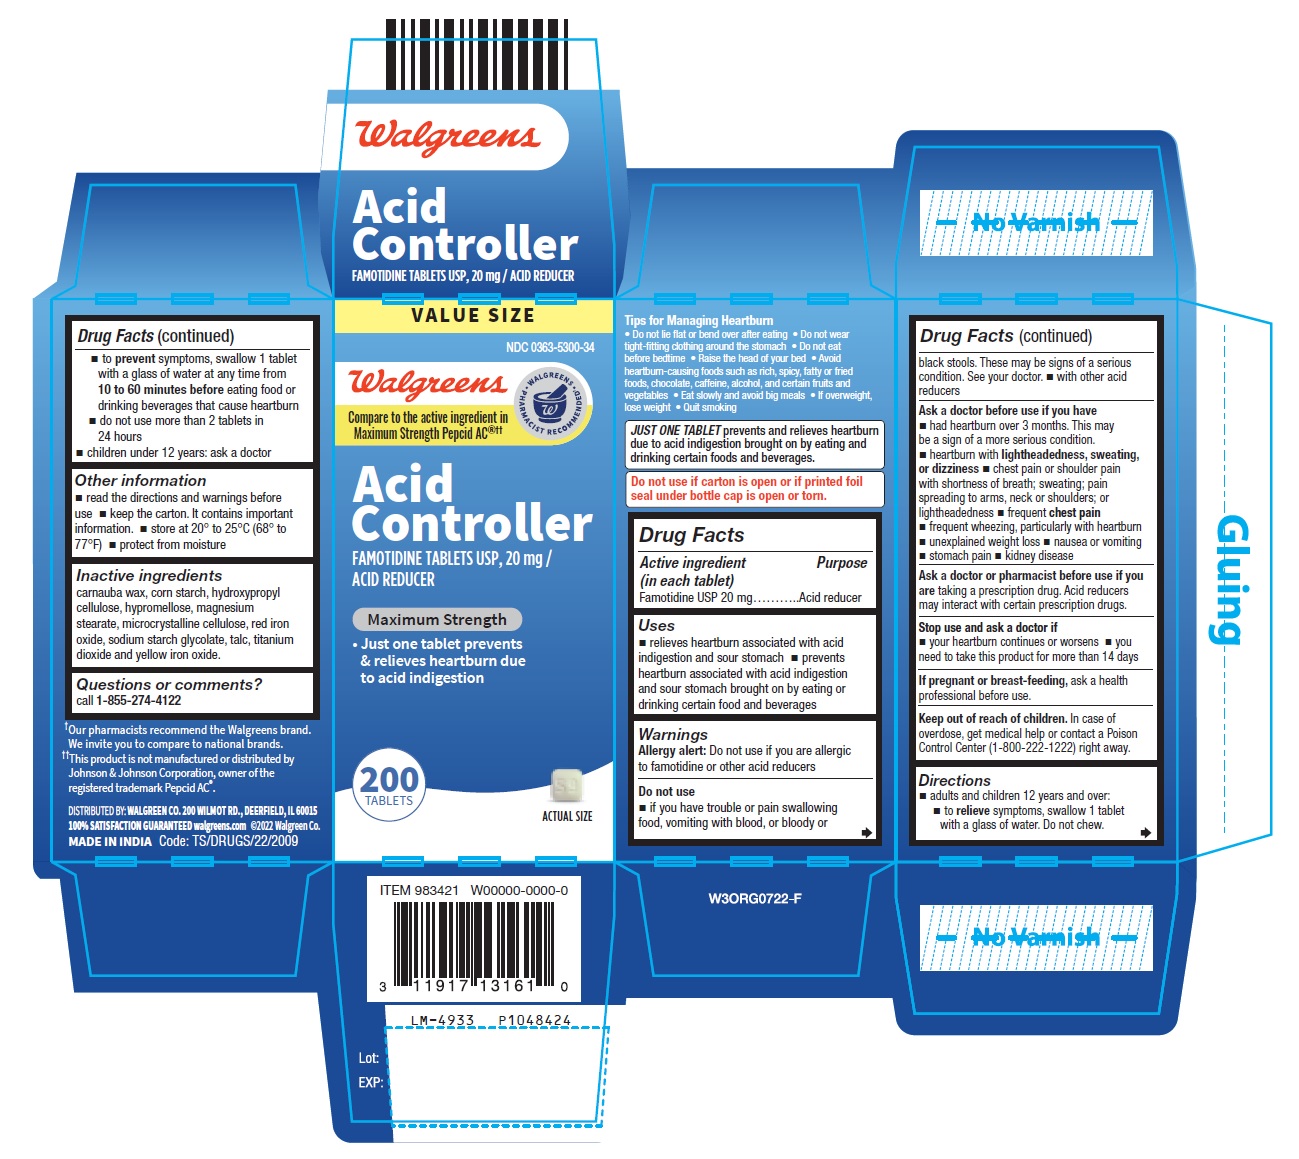 PACKAGE LABEL-PRINCIPAL DISPLAY PANEL -20 mg (25 Tablets, Container Carton Label)